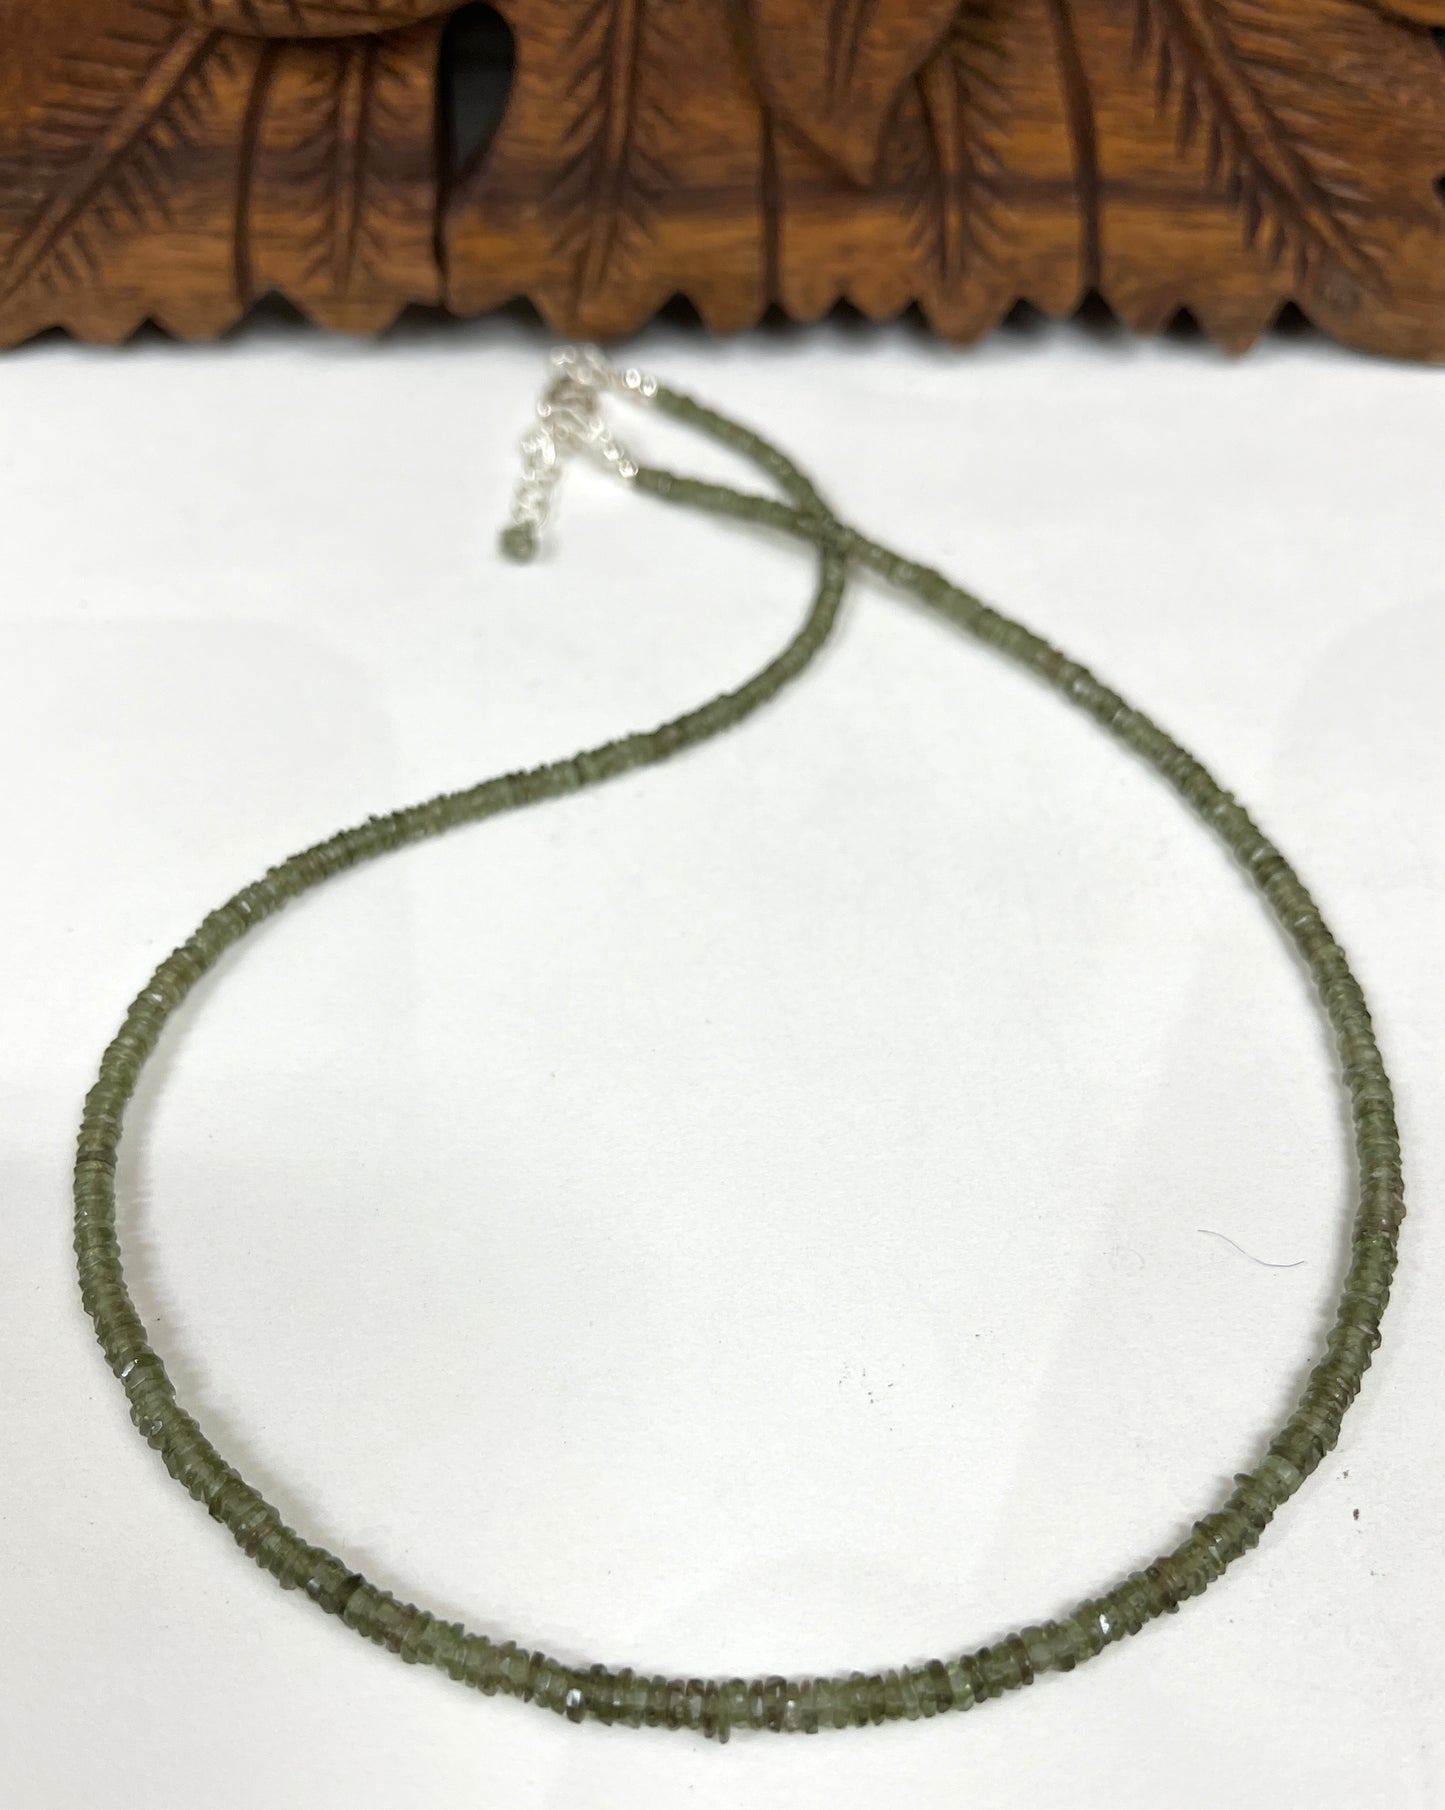 3.3mm Faceted Moldavite Necklace - Transformation Stone